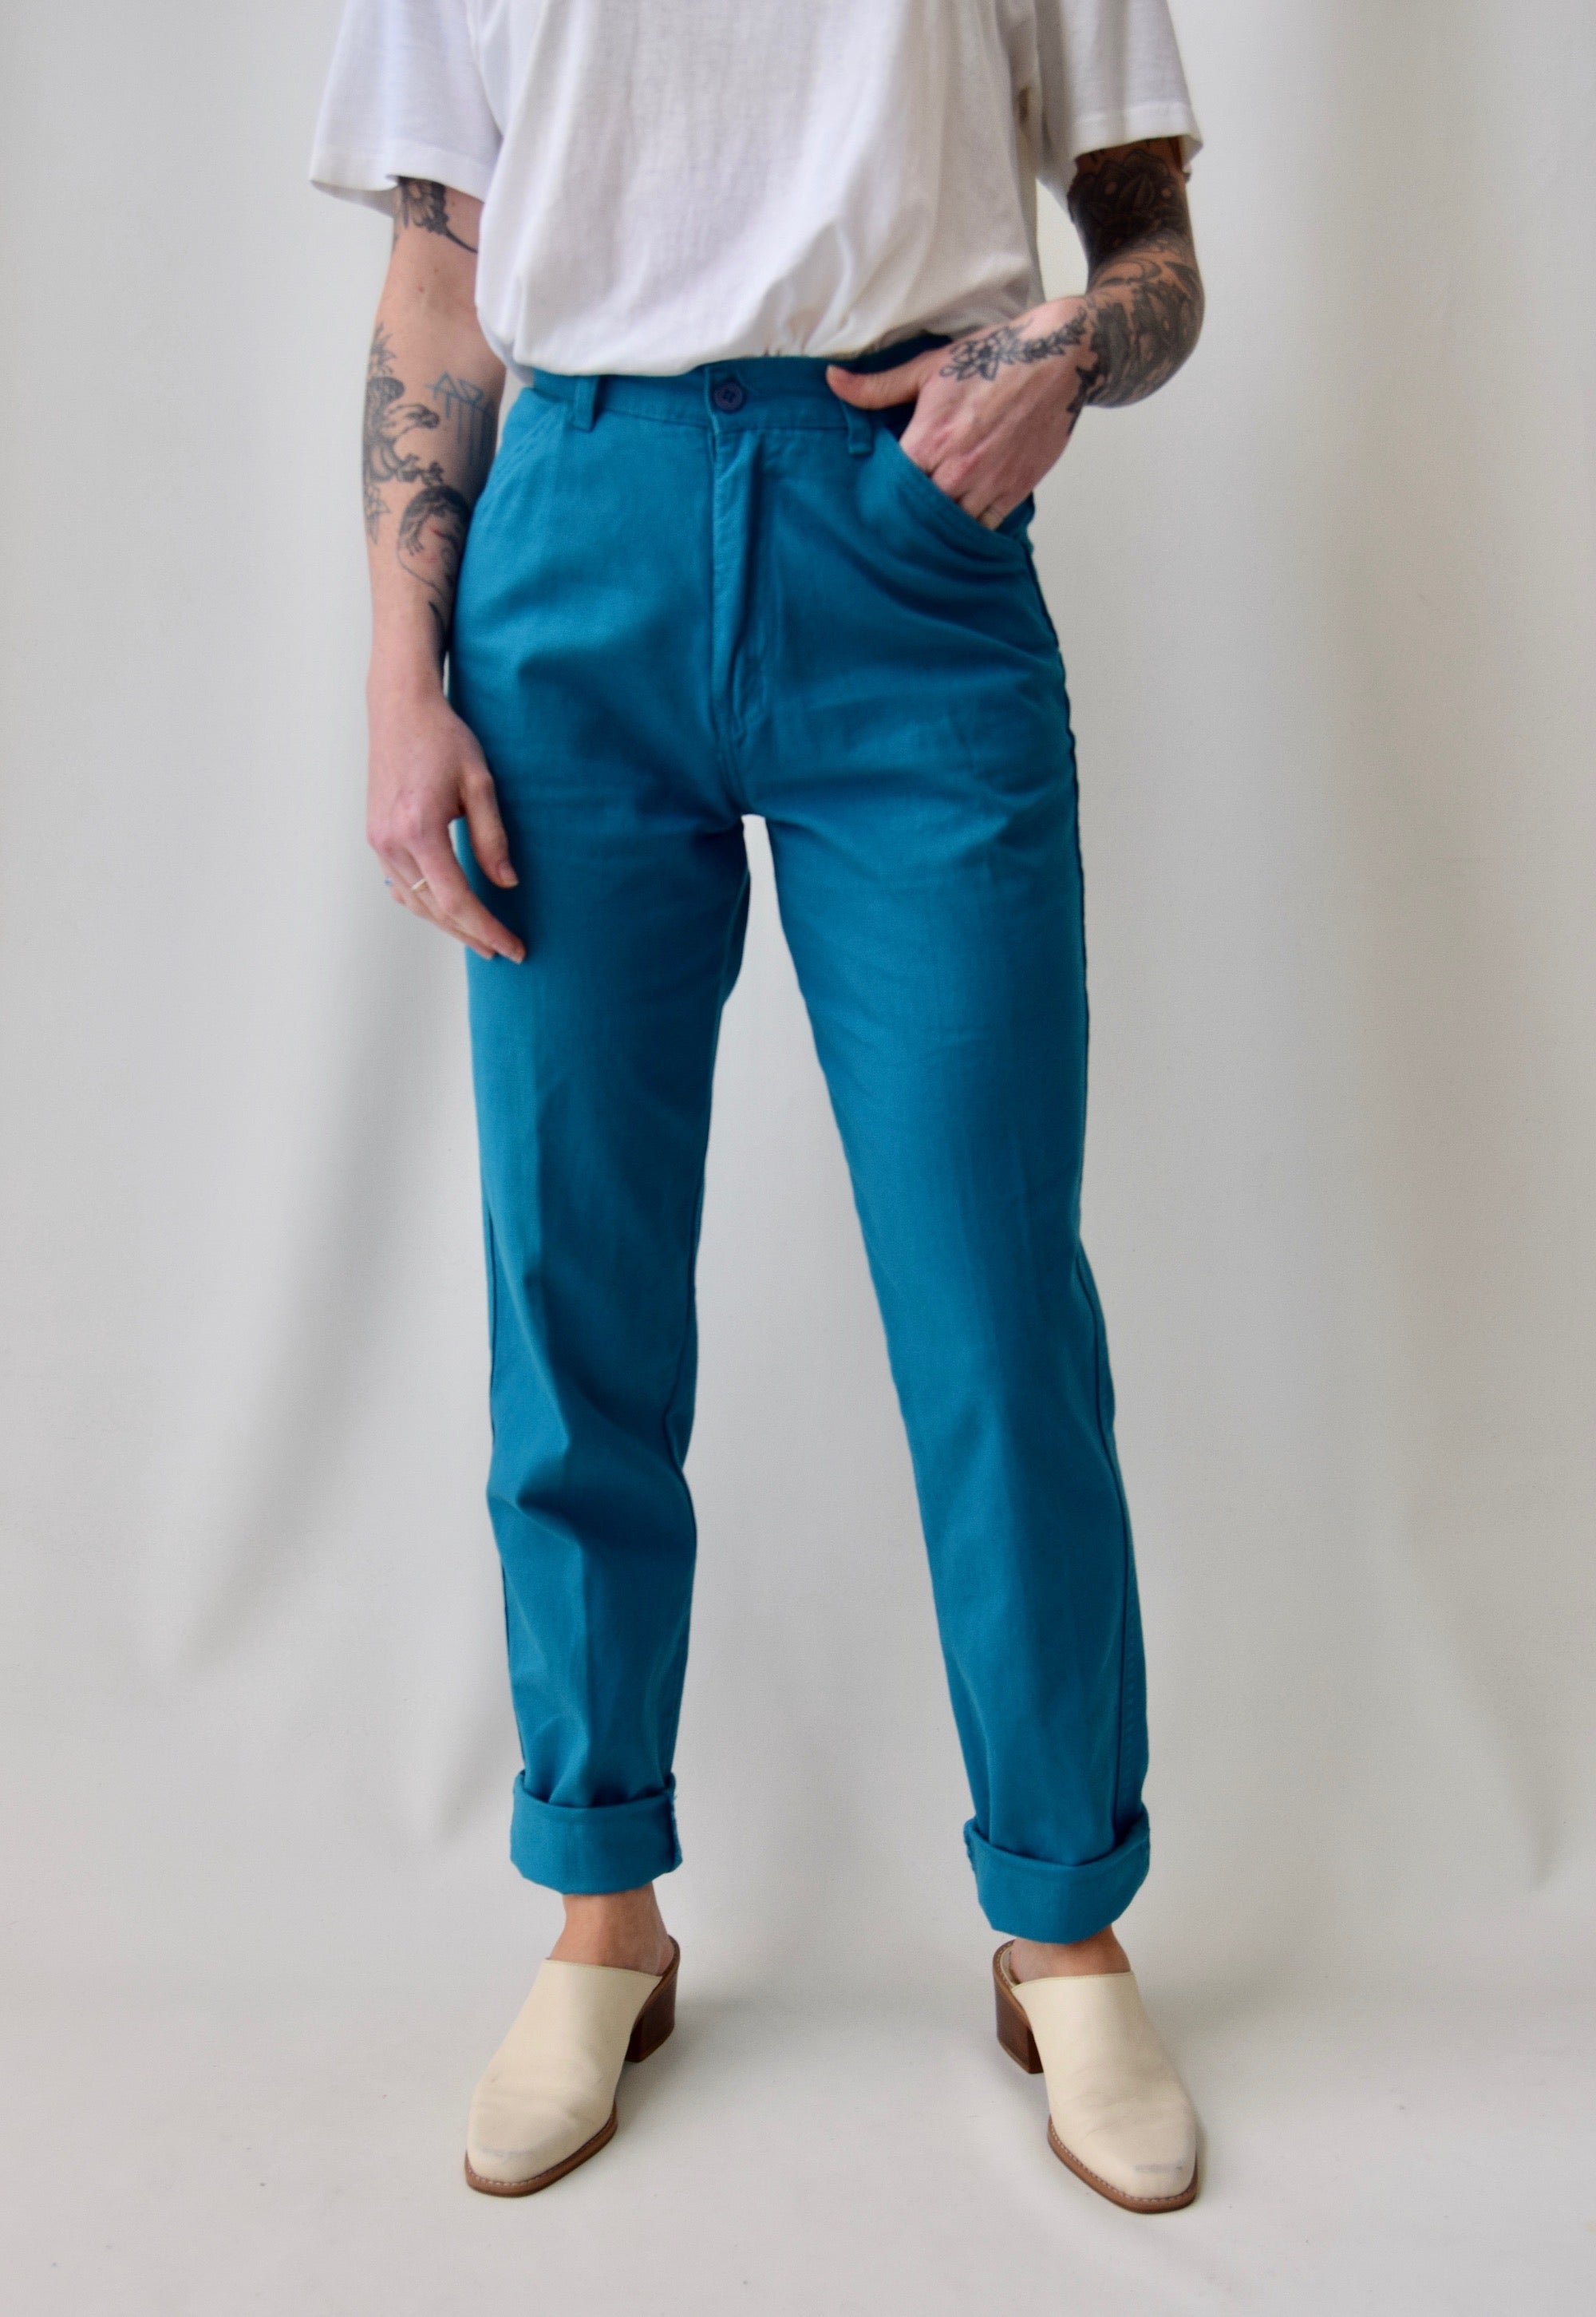 Teal Everyday Trousers